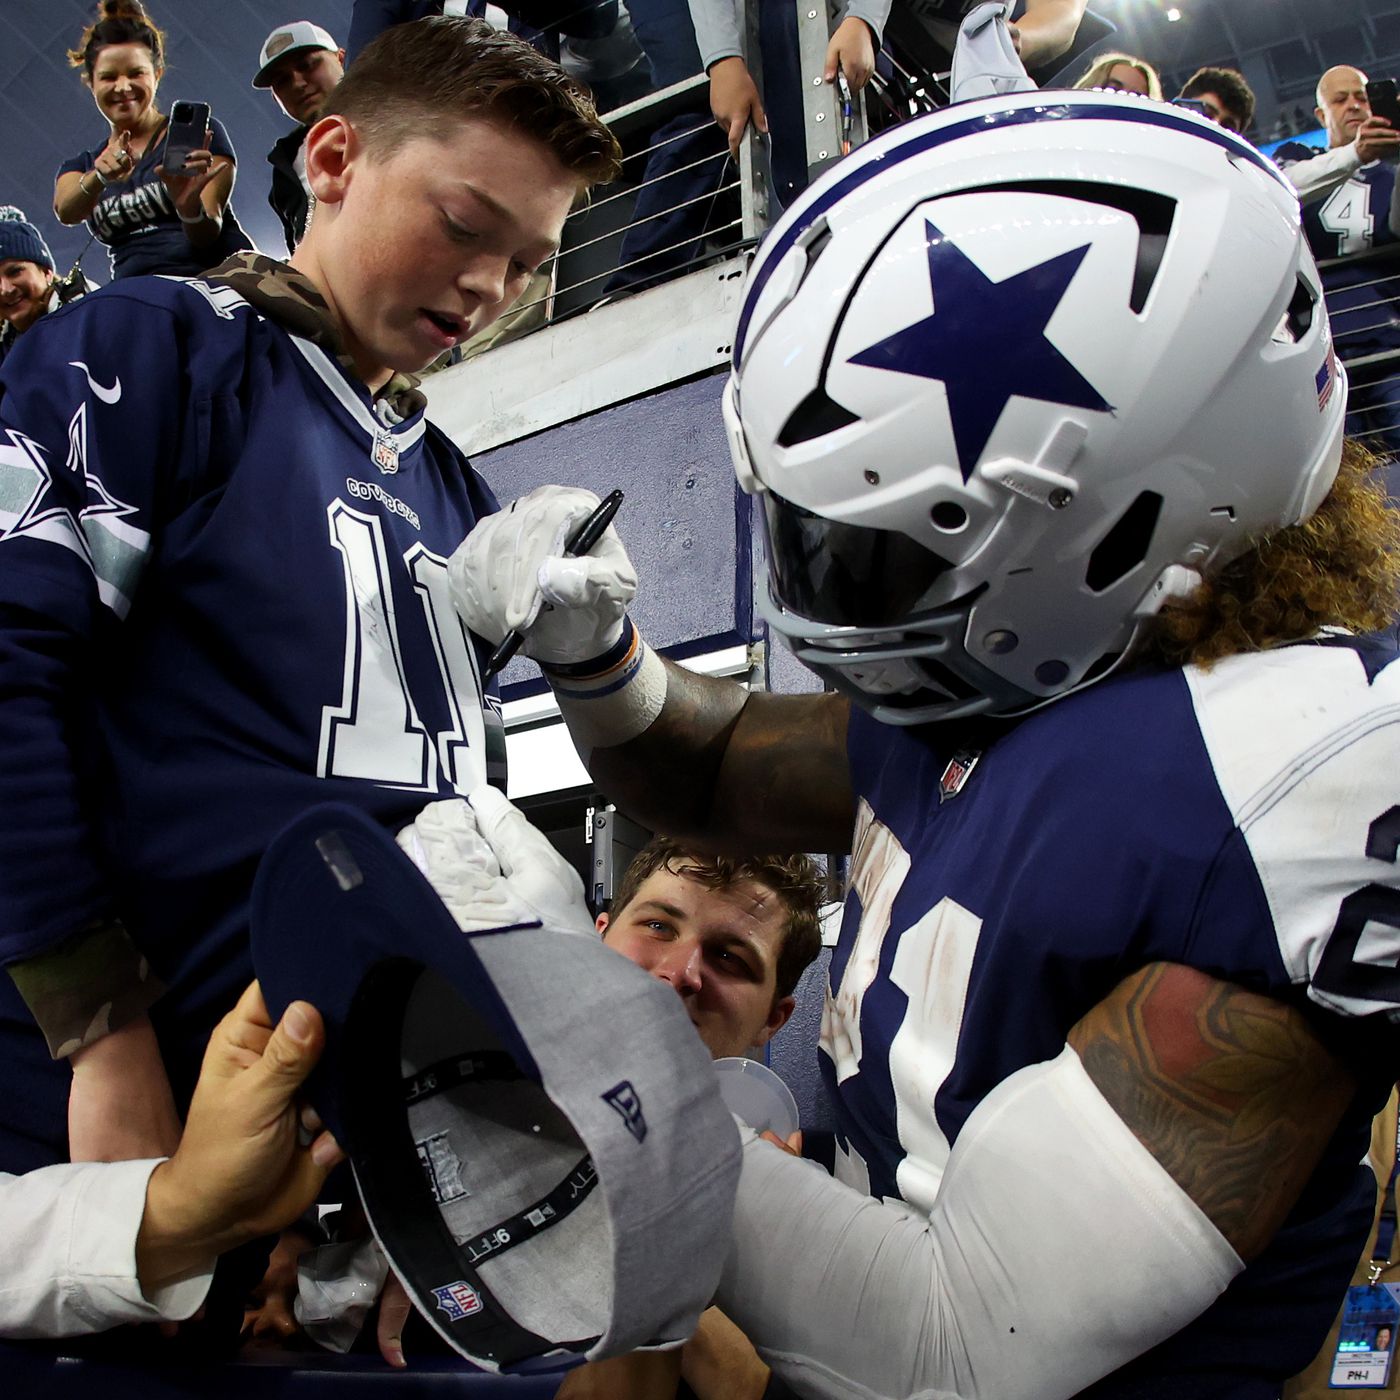 Cowboys-Giants Thanksgiving game sets record for most-watched